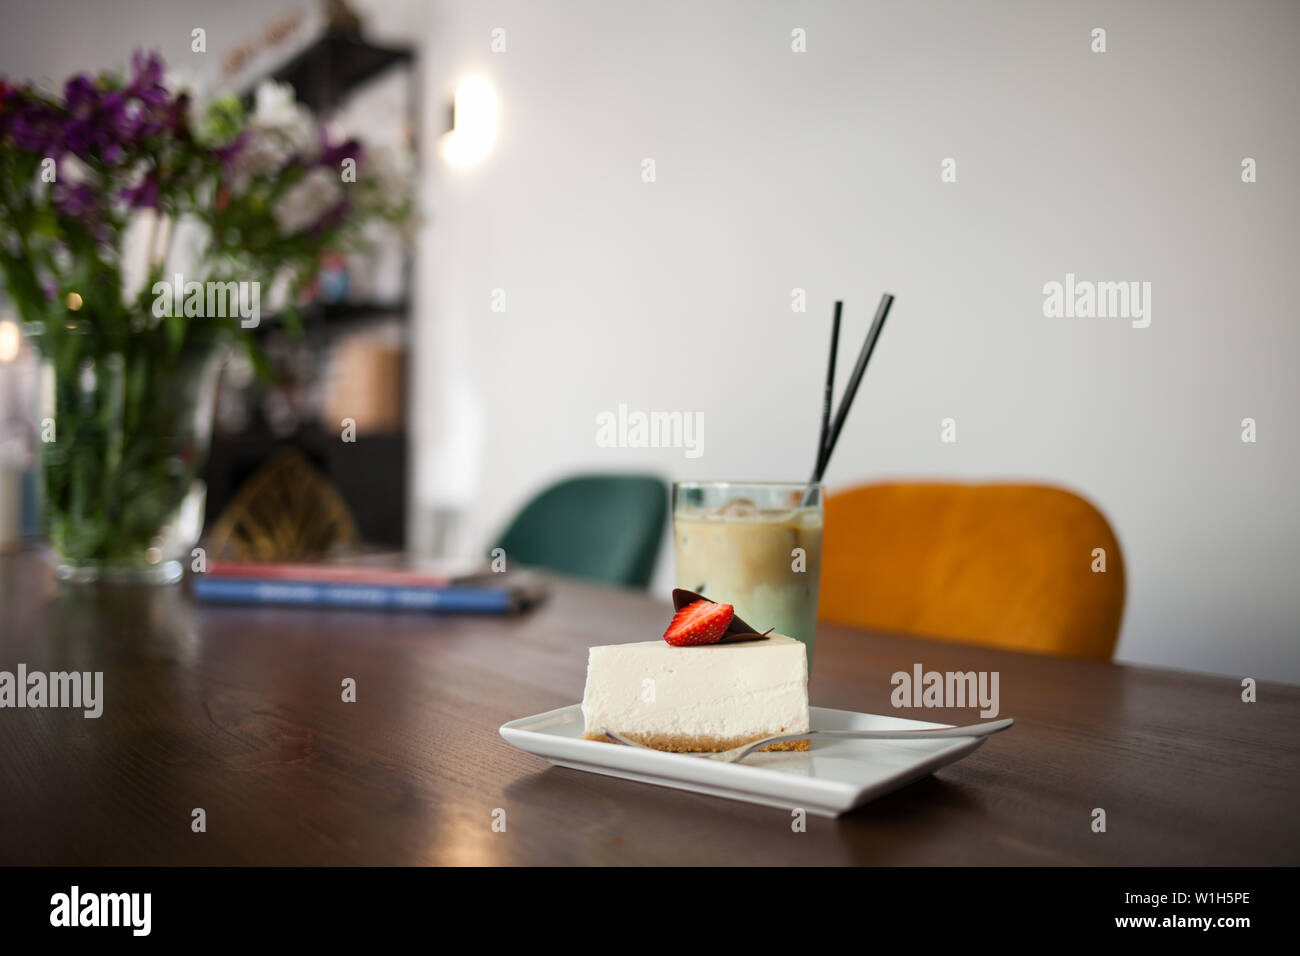 Tasty delicious cake with strawberry and Cold Coffee Frappe with ice. Cafe interior on the background. Stock Photo